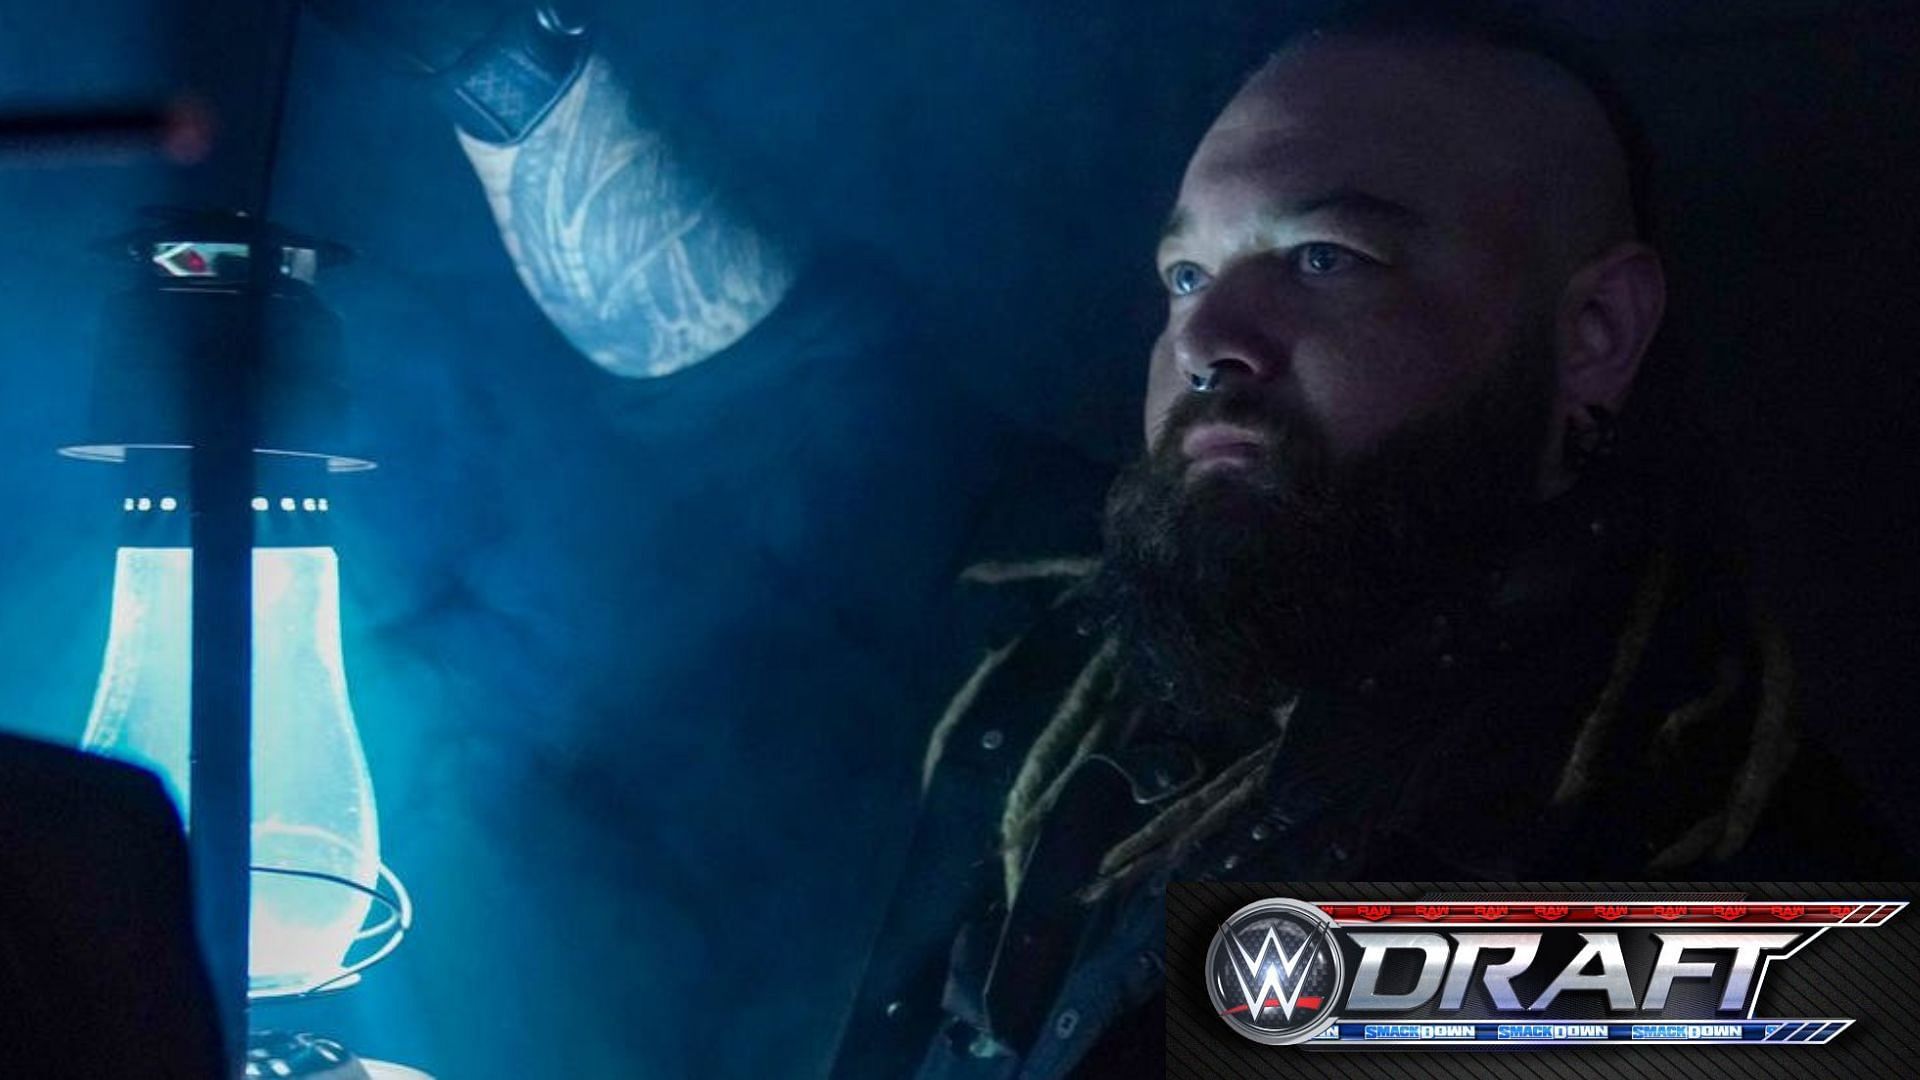 Potentially disappointing update on Bray Wyatt